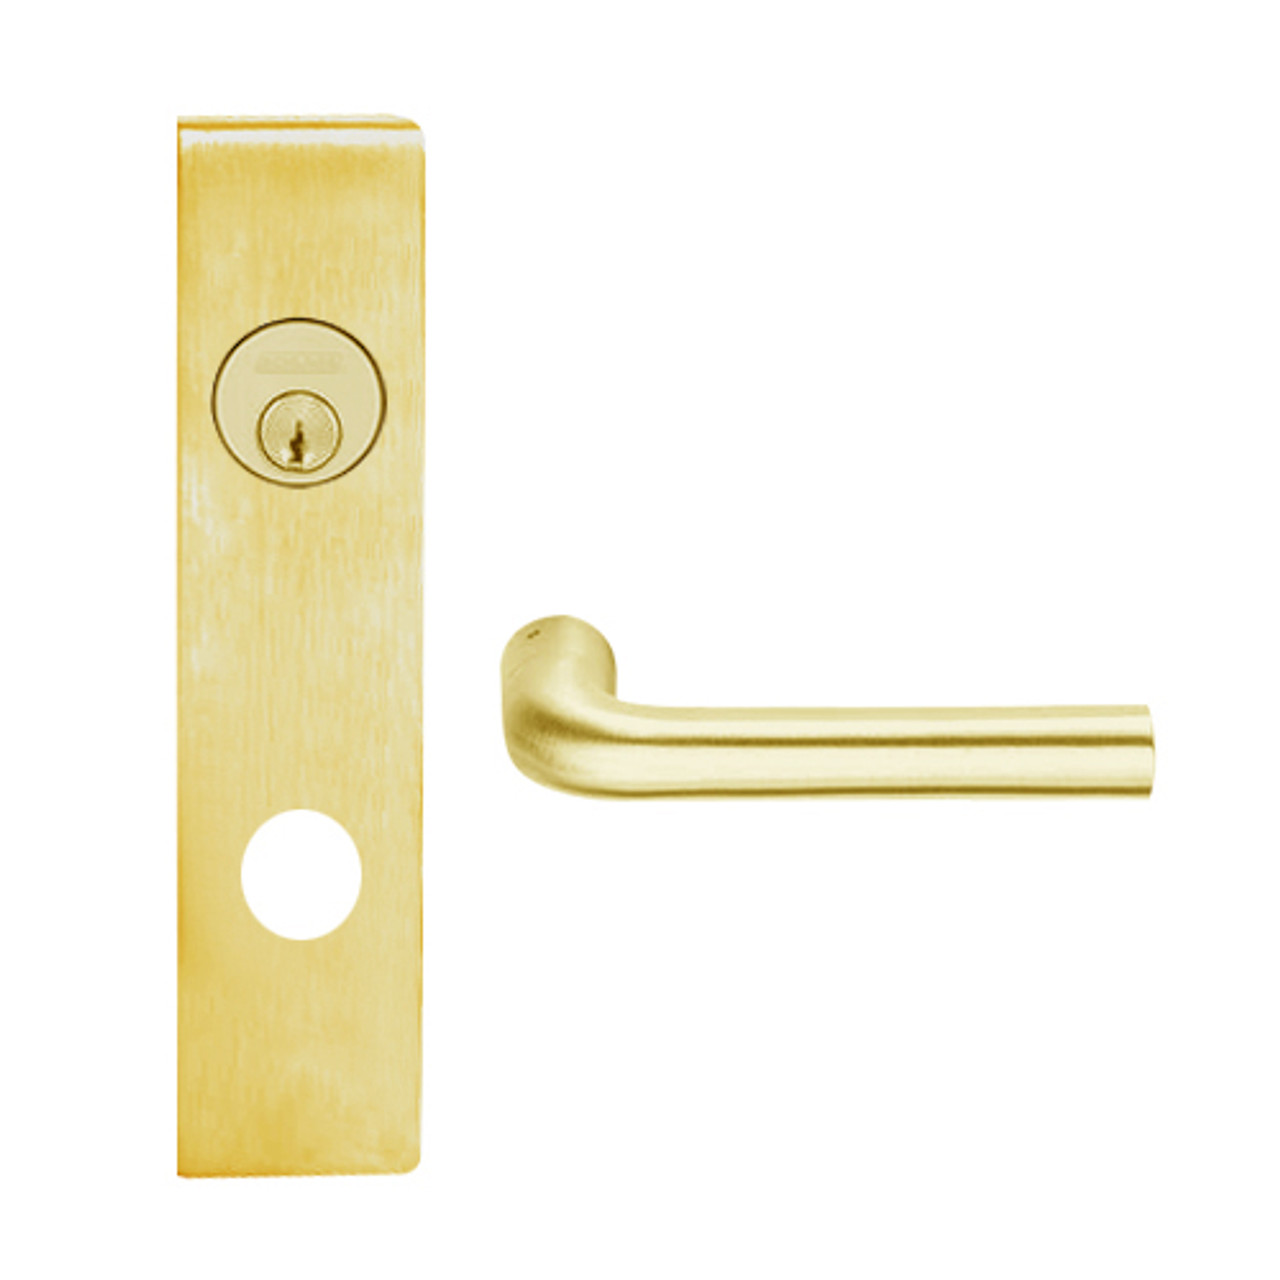 L9070L-02L-605 Schlage L Series Less Cylinder Classroom Commercial Mortise Lock with 02 Cast Lever Design in Bright Brass